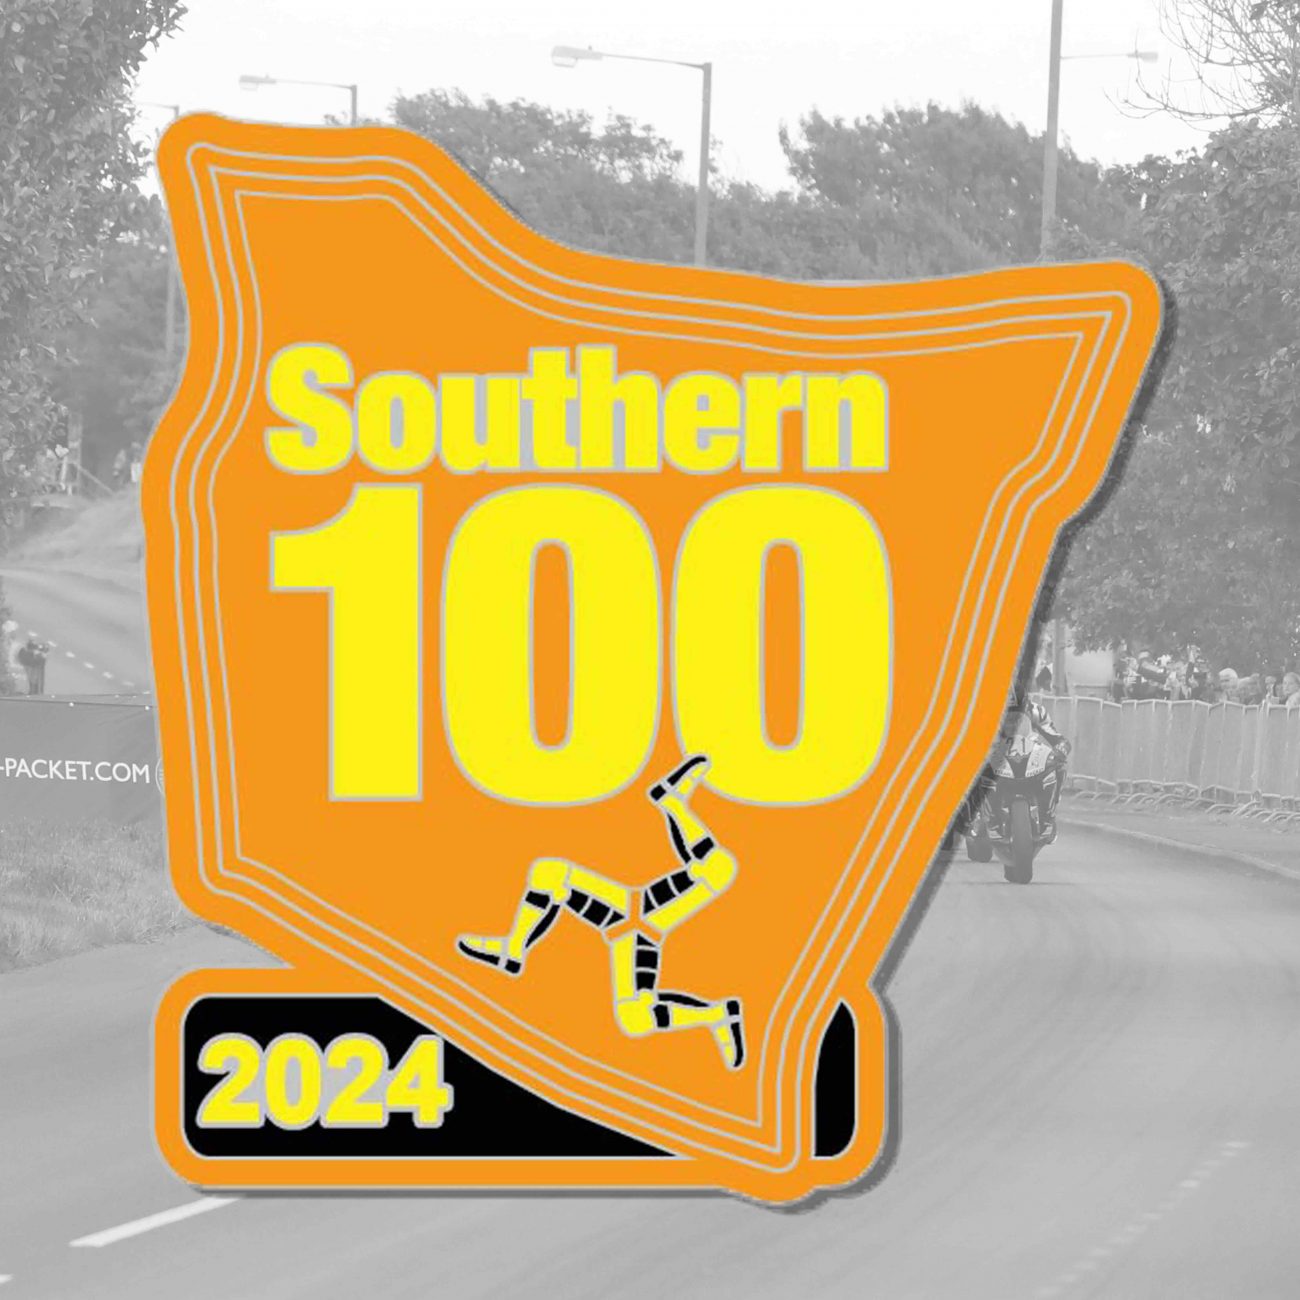 Pin Badges Archives Southern 100 International Road Races